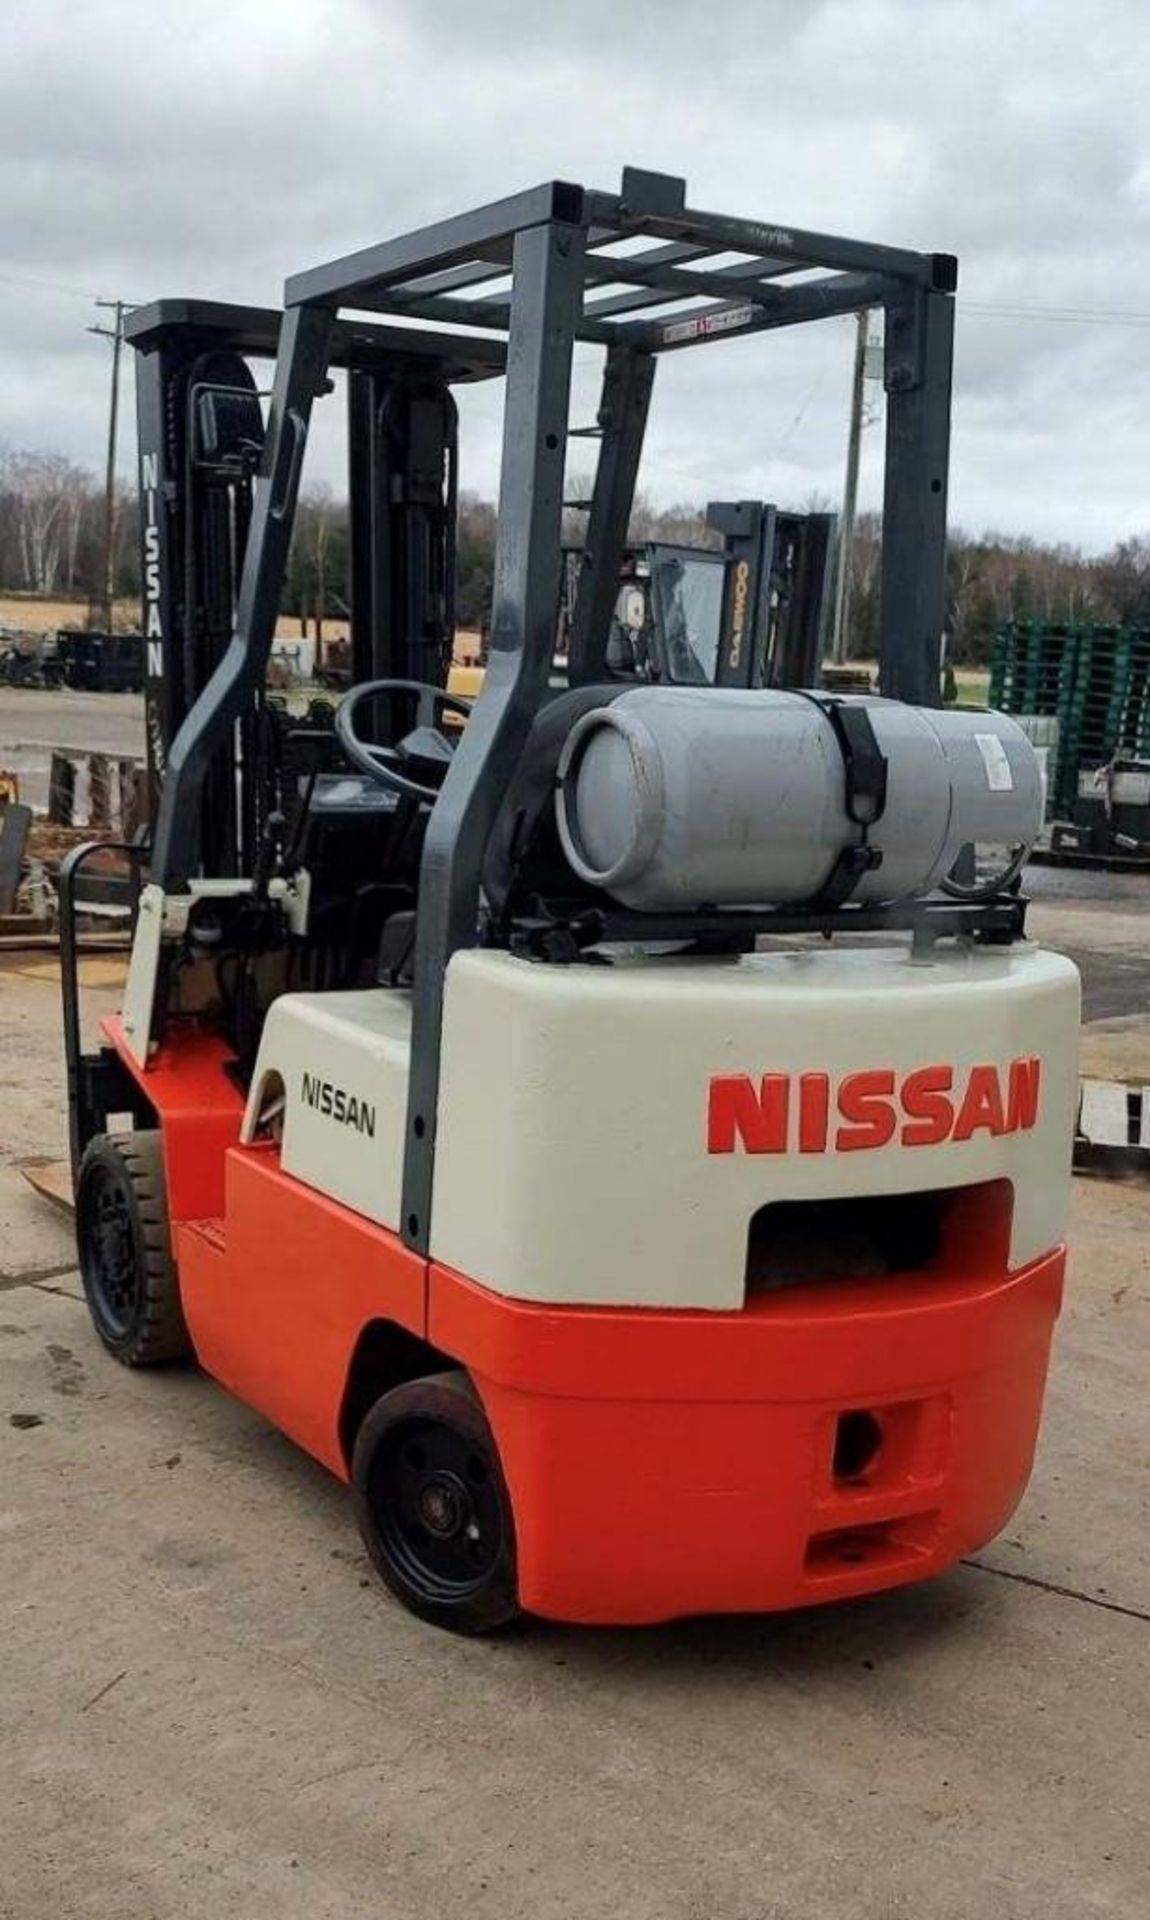 Nissan 5,000-lb. Capacity Forklift, Model: CPJ02A-25P, S/N: CPJ02-9P8278, LPG, Solid Tires, 3-Stage - Image 4 of 4